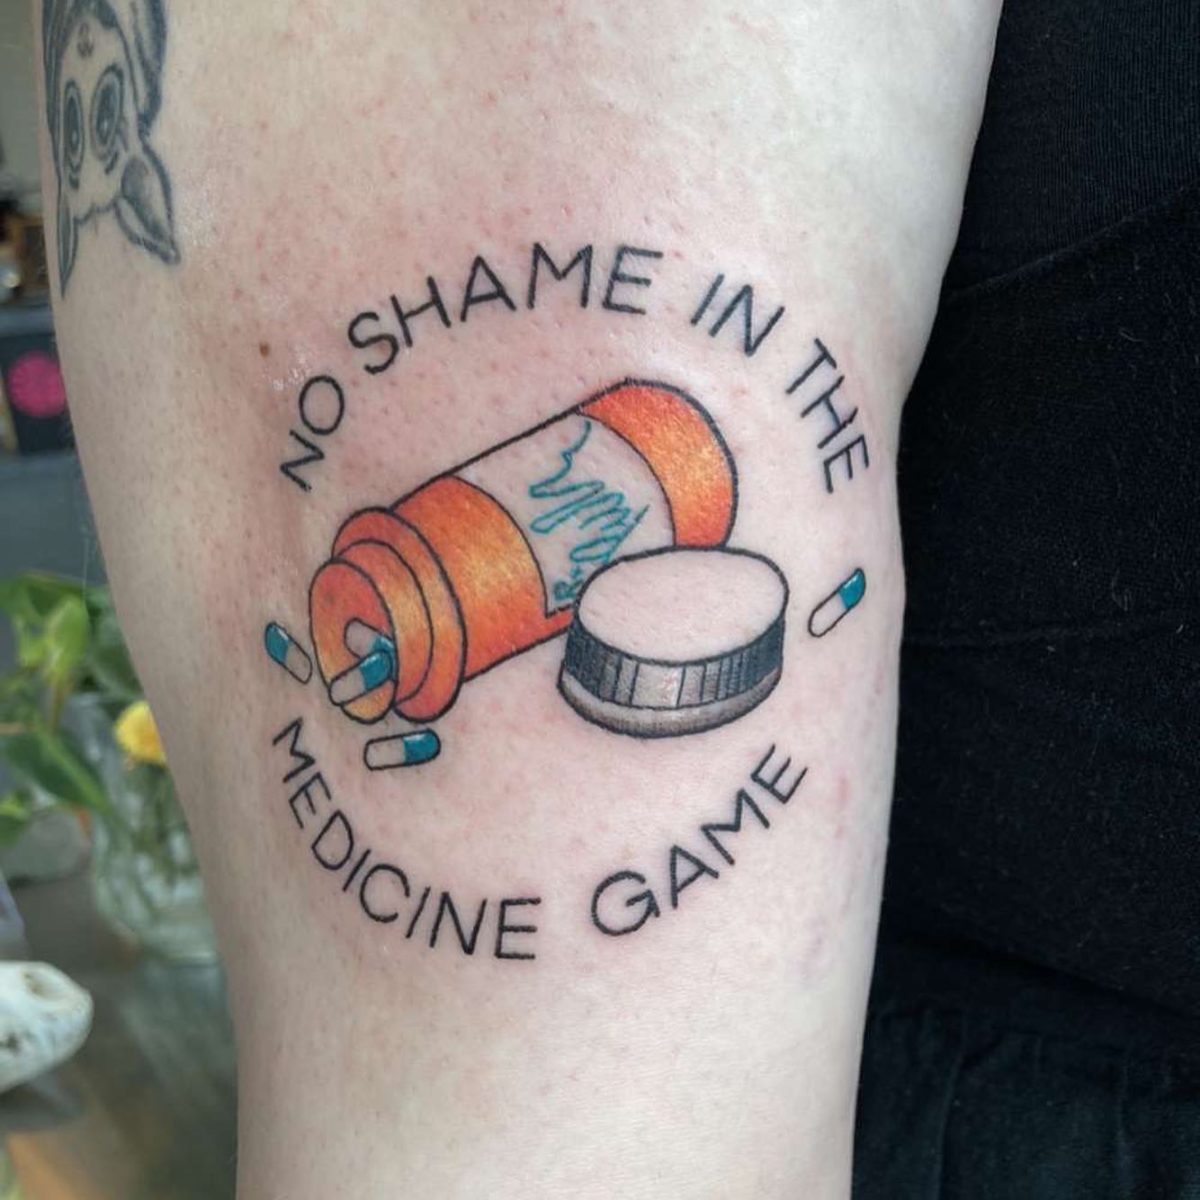 50 Mental Health Tattoos That Raise Awareness of Depression & Anxiety | Mental health tattoos raise awareness and show solidarity. Take a look at the meaningful designs we found!